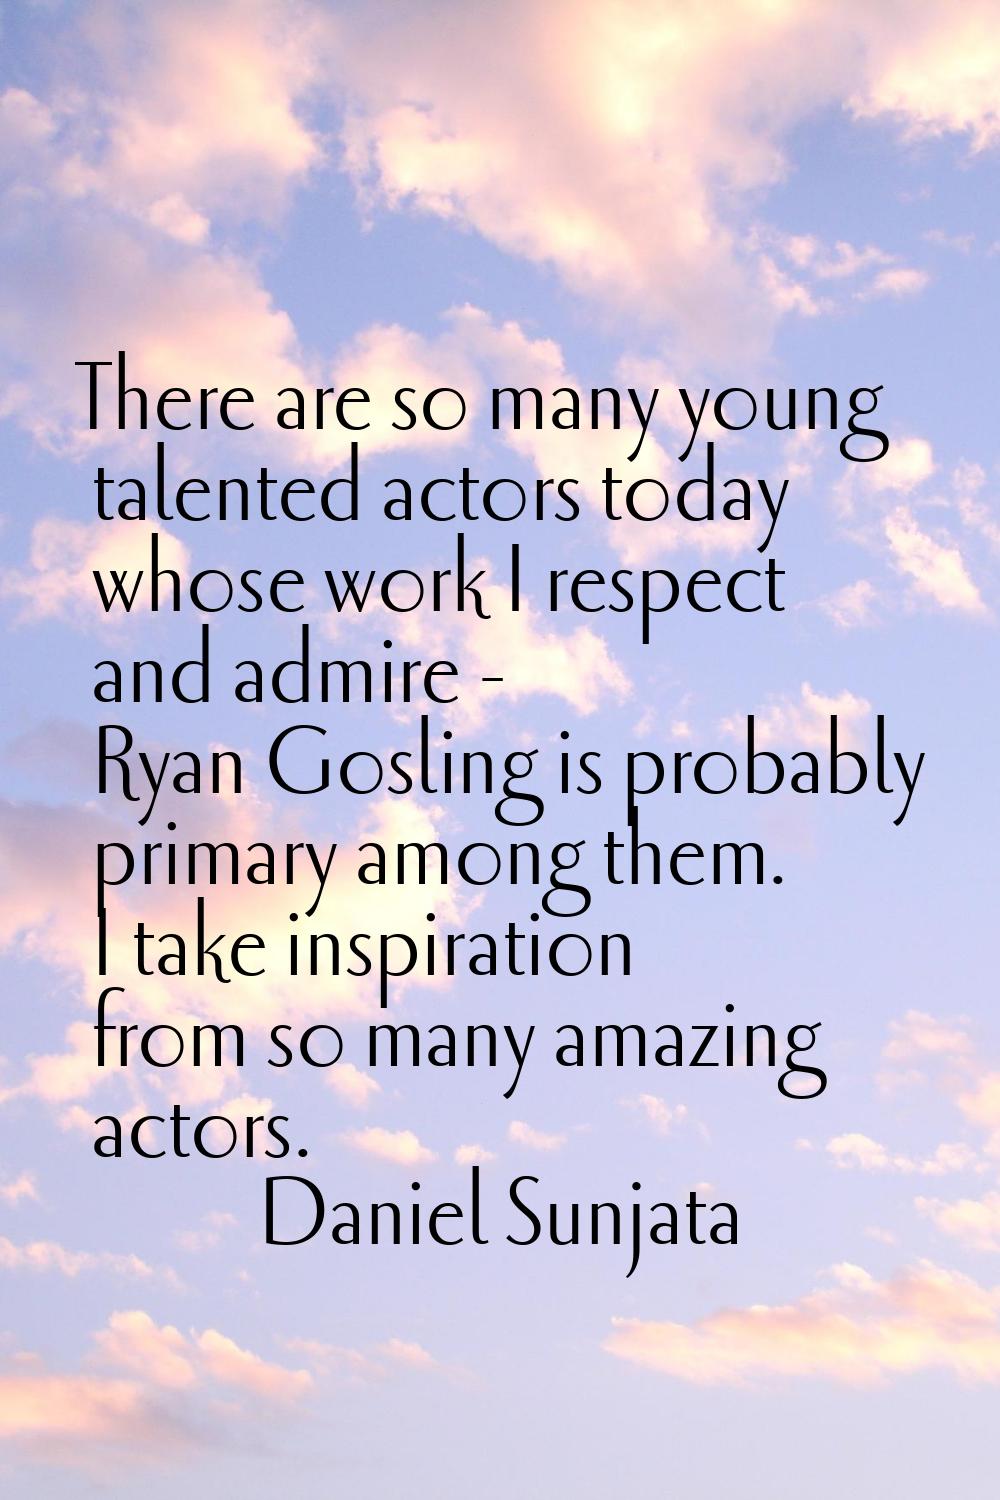 There are so many young talented actors today whose work I respect and admire - Ryan Gosling is pro